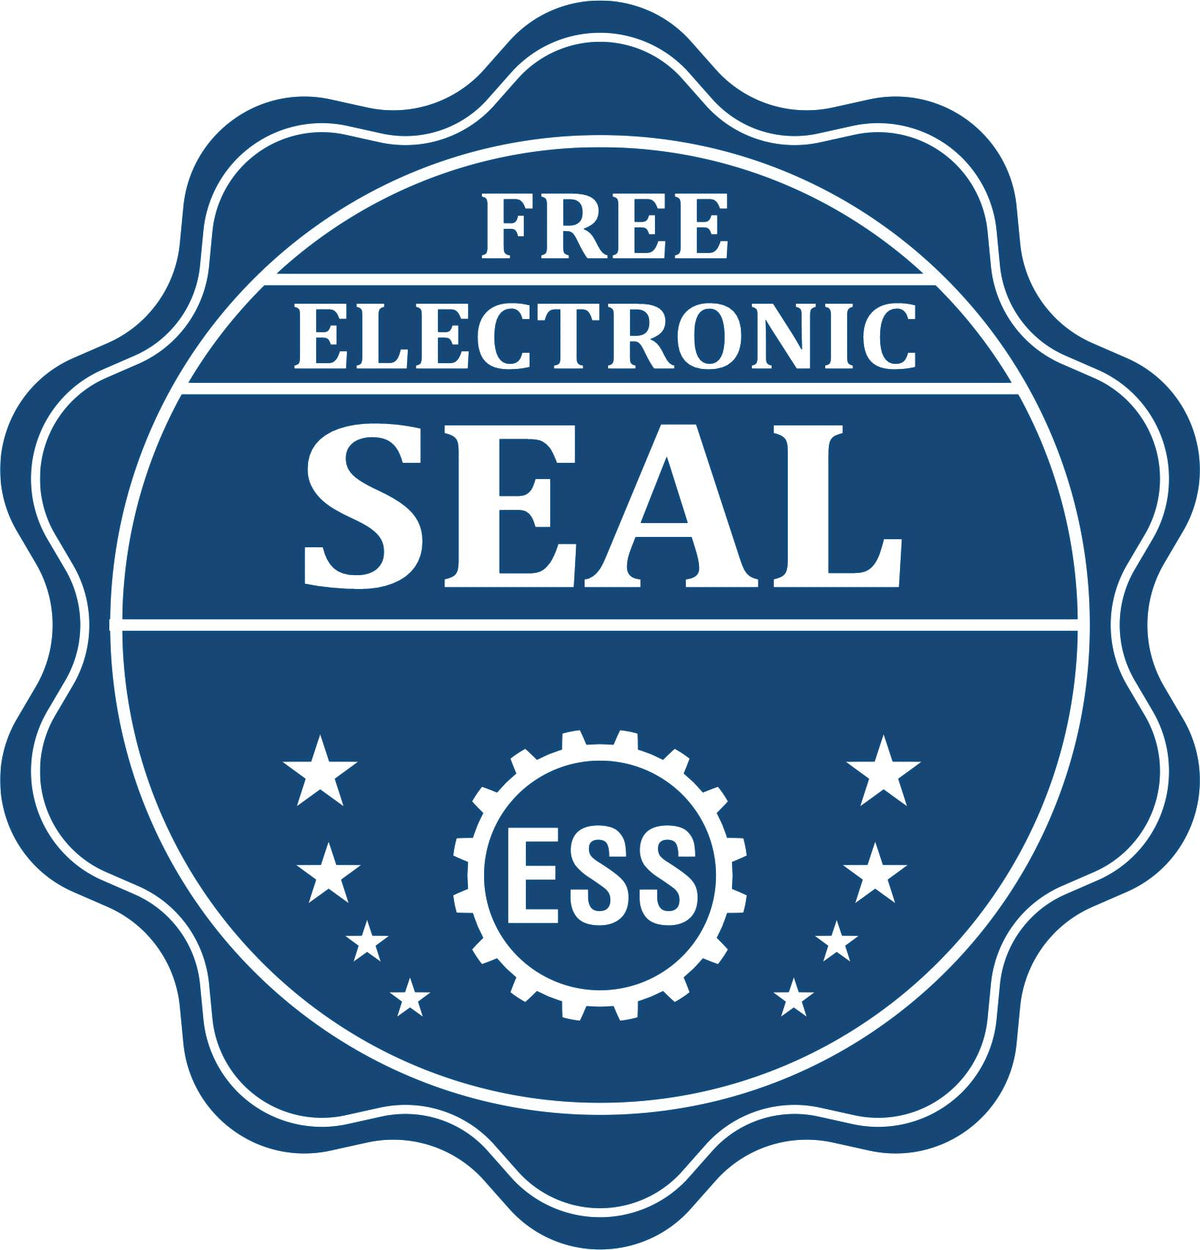 A badge showing a free electronic seal for the PSI Oklahoma Notary Stamp with stars and the ESS gear on the emblem.